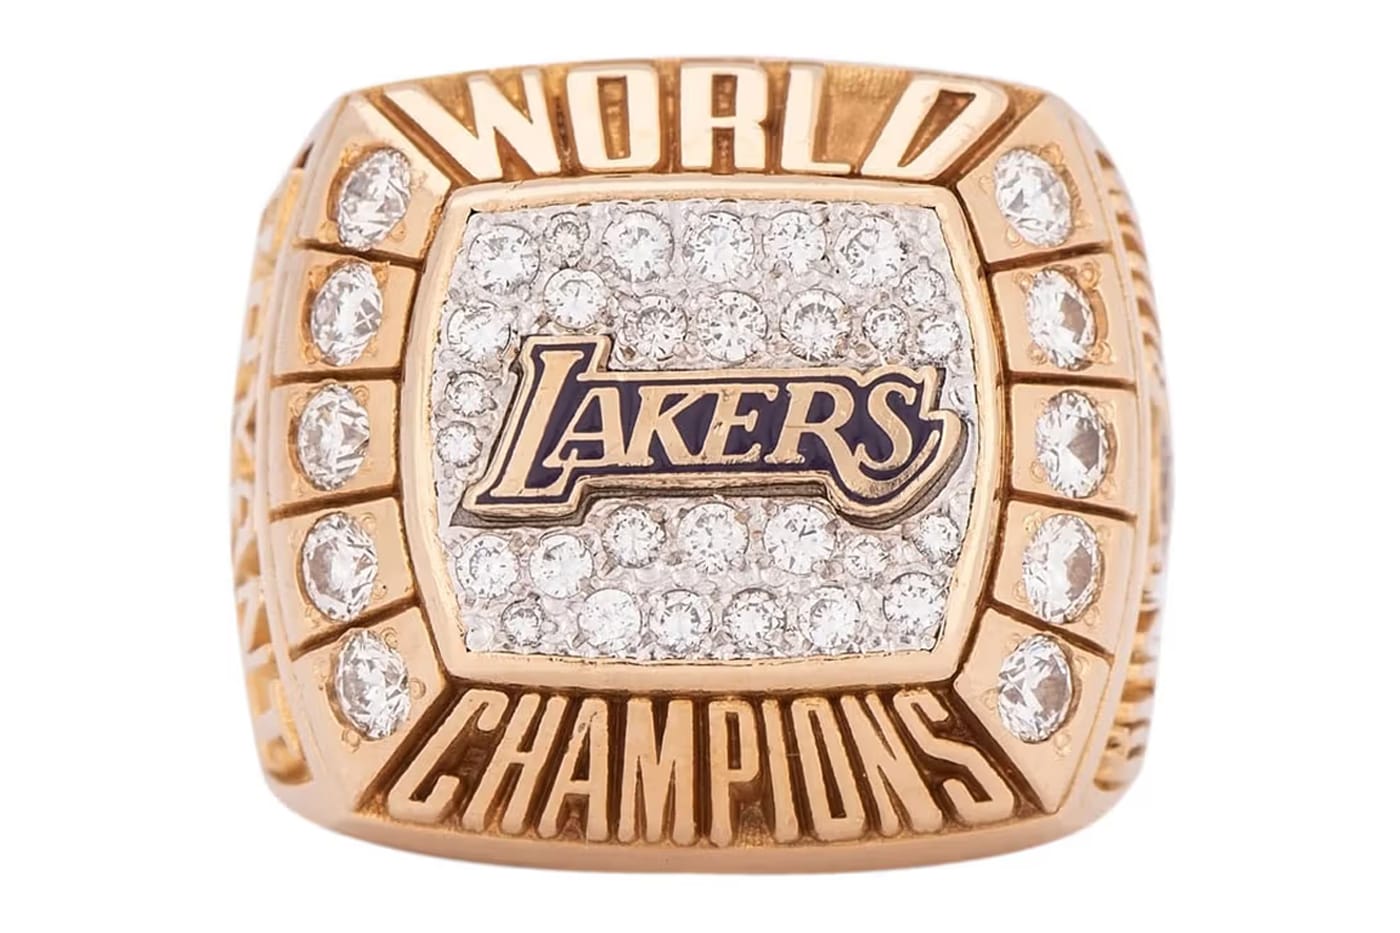 Lakers Championship Rings | Los Angeles Lakers